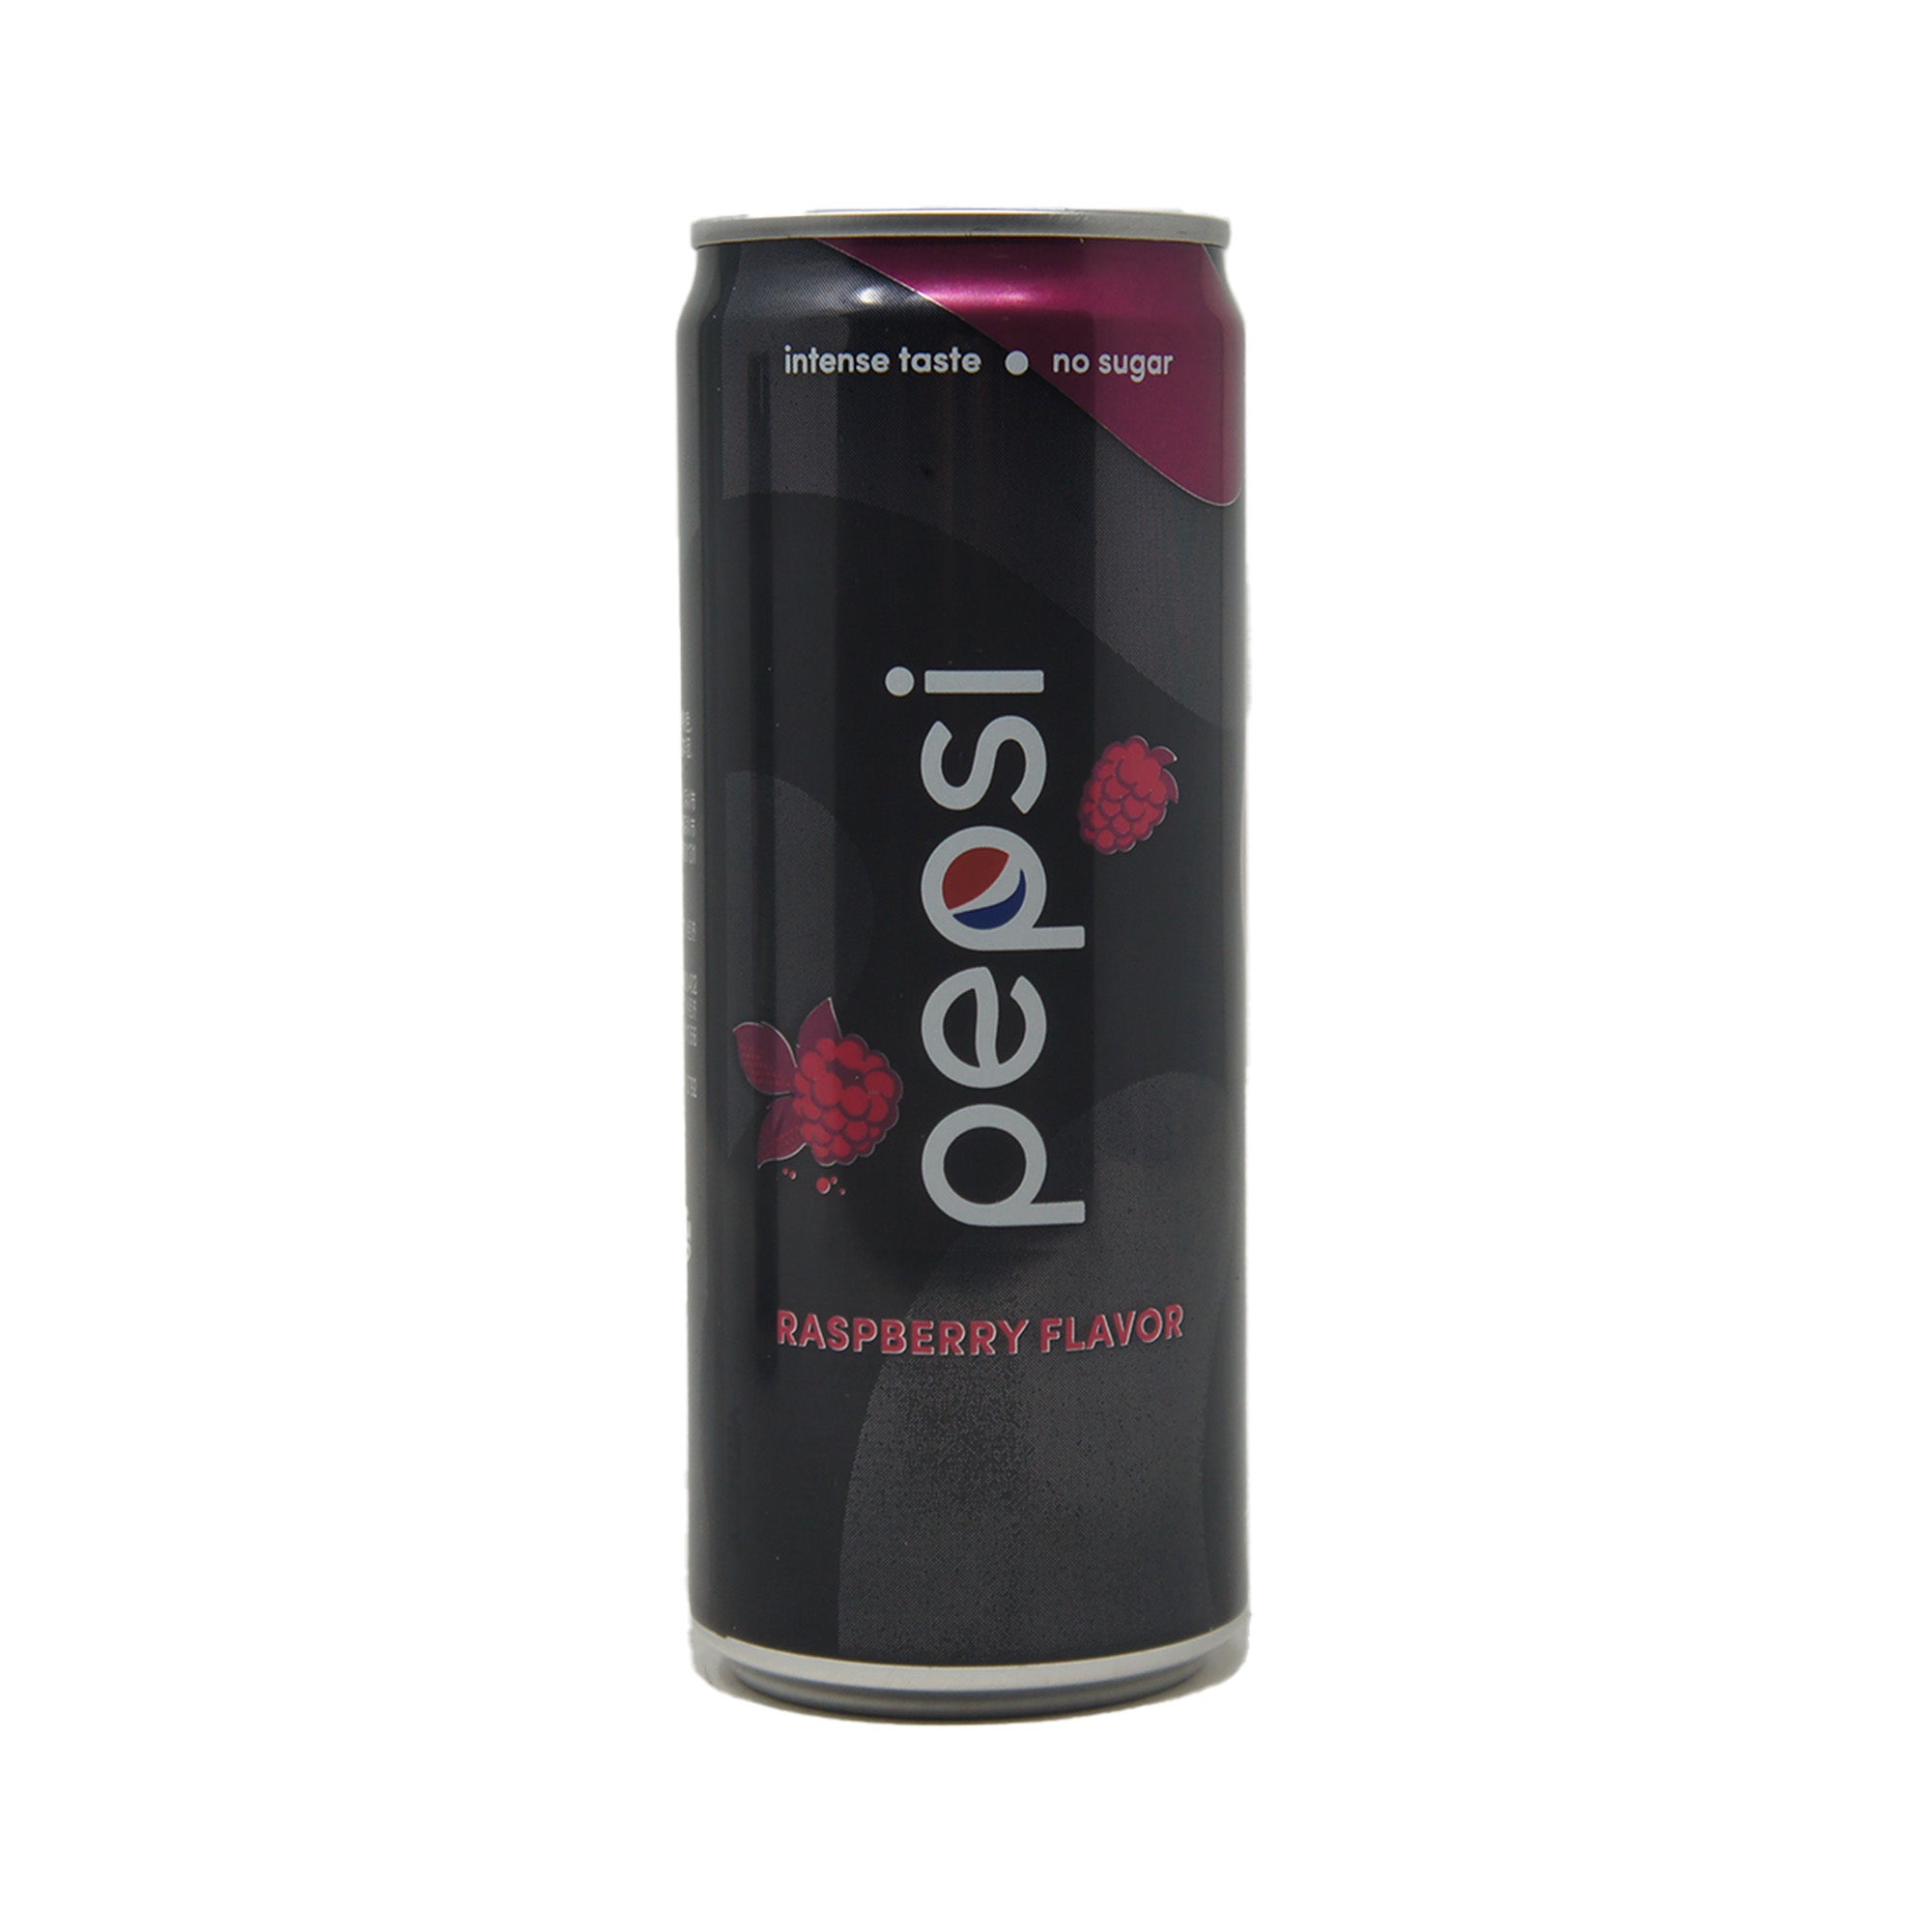 Pepsi Sugar Free, Raspberry Flavored Soda, 330 mL Can, Imported from China